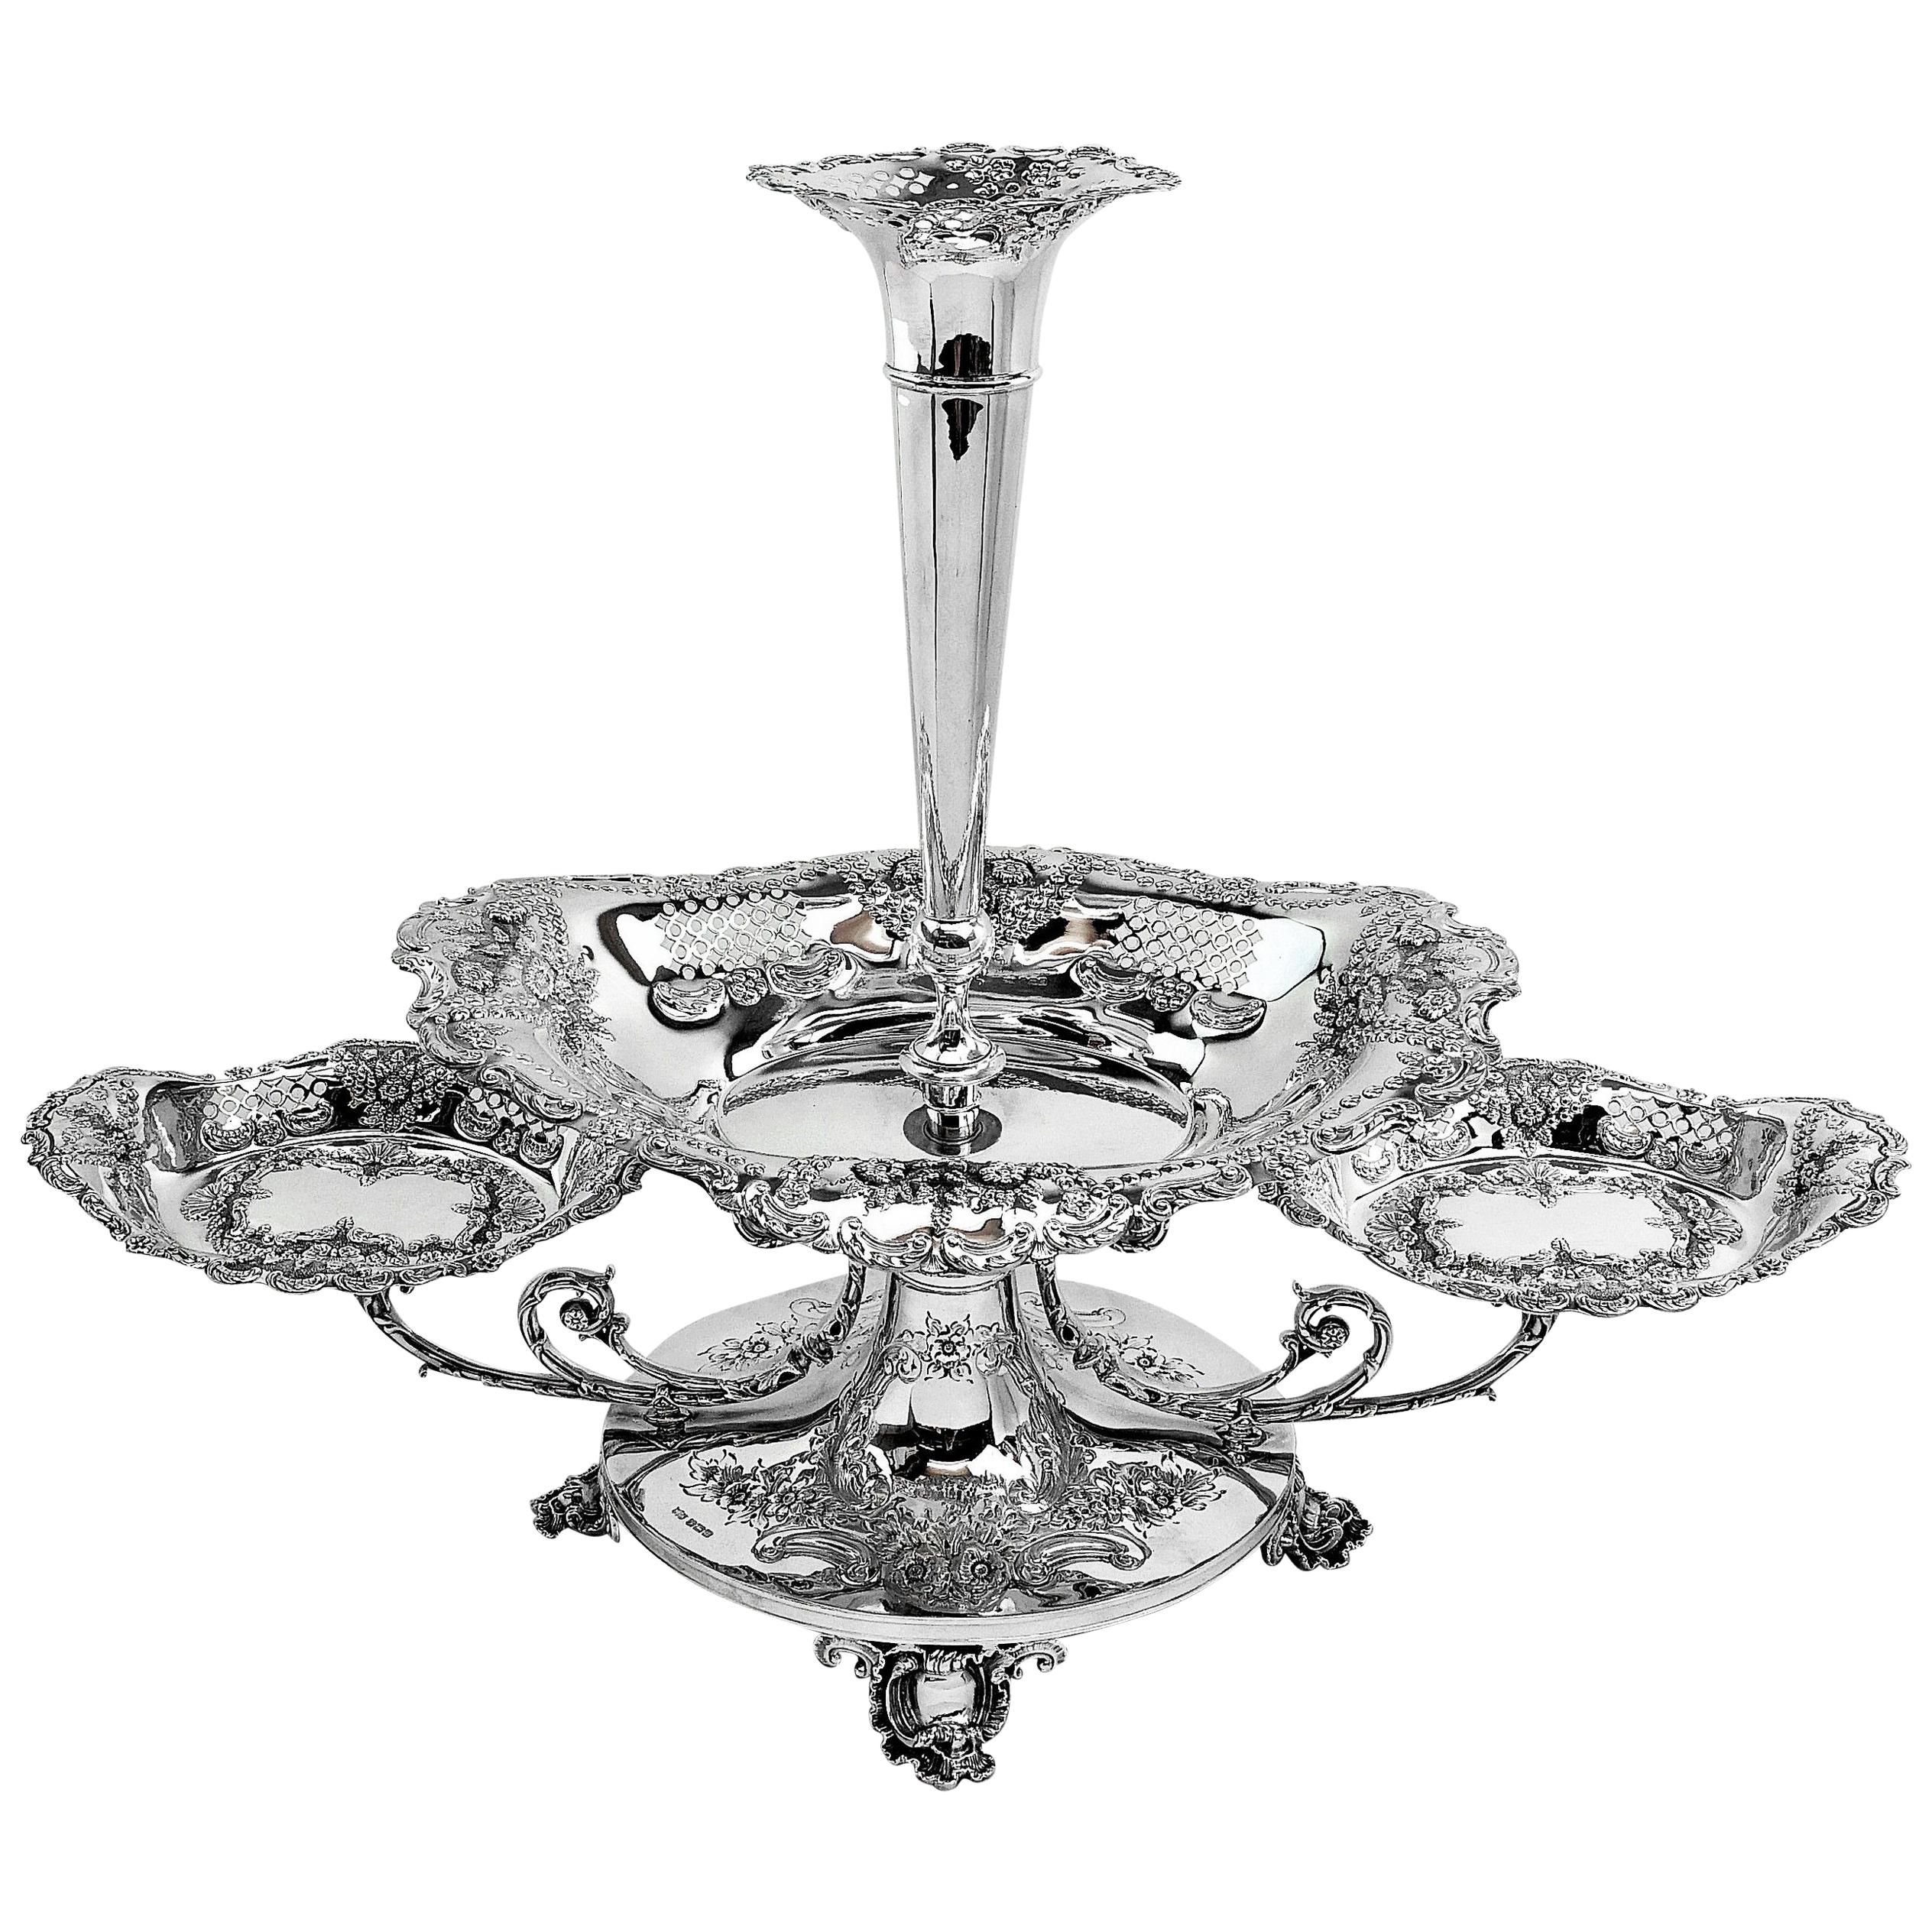 Large Antique Sterling Silver Epergne / Centrepiece Sheffield, 1914